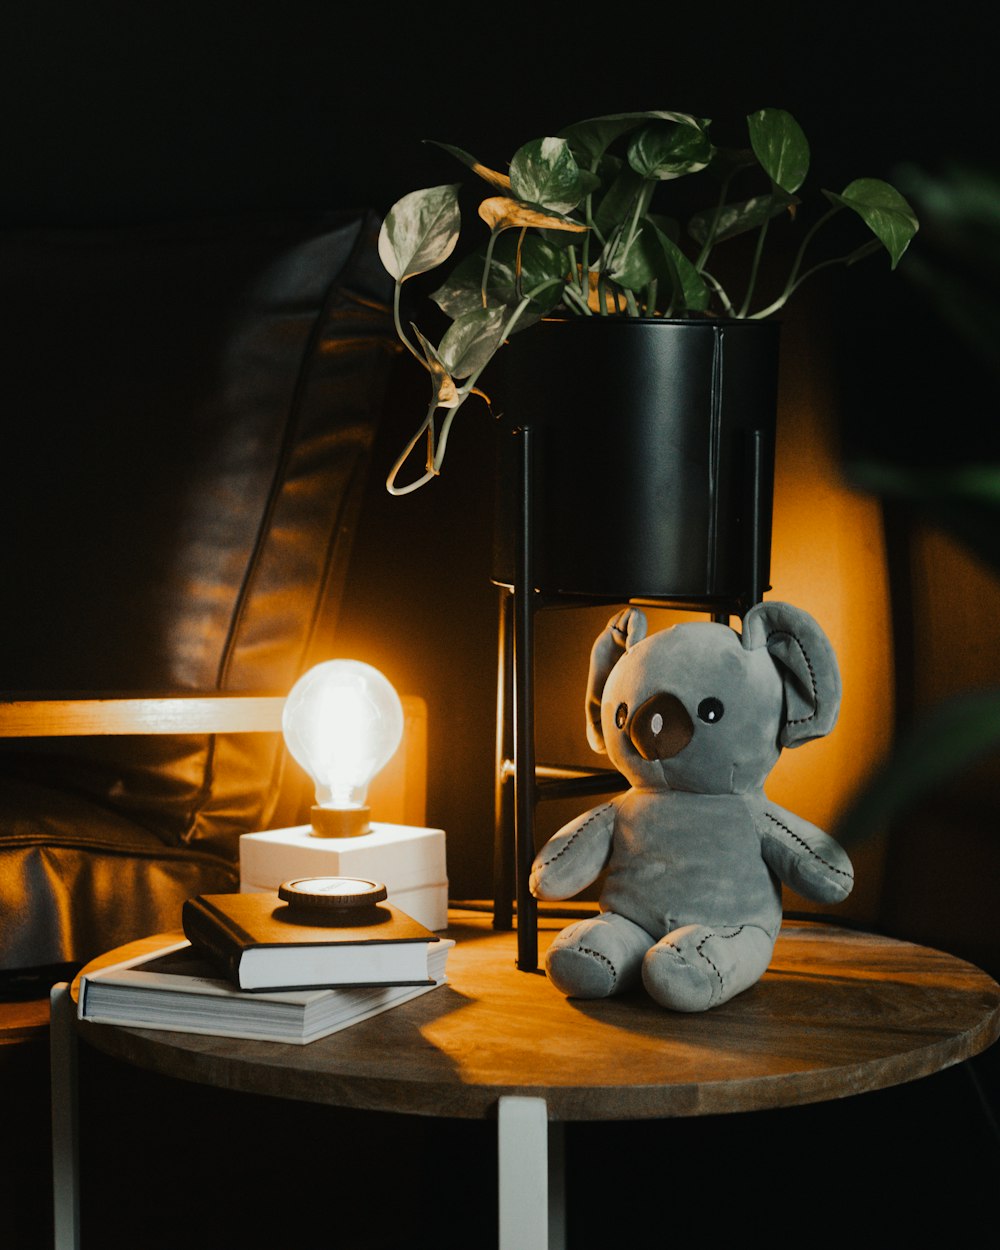 a stuffed elephant sitting on a table next to a lamp